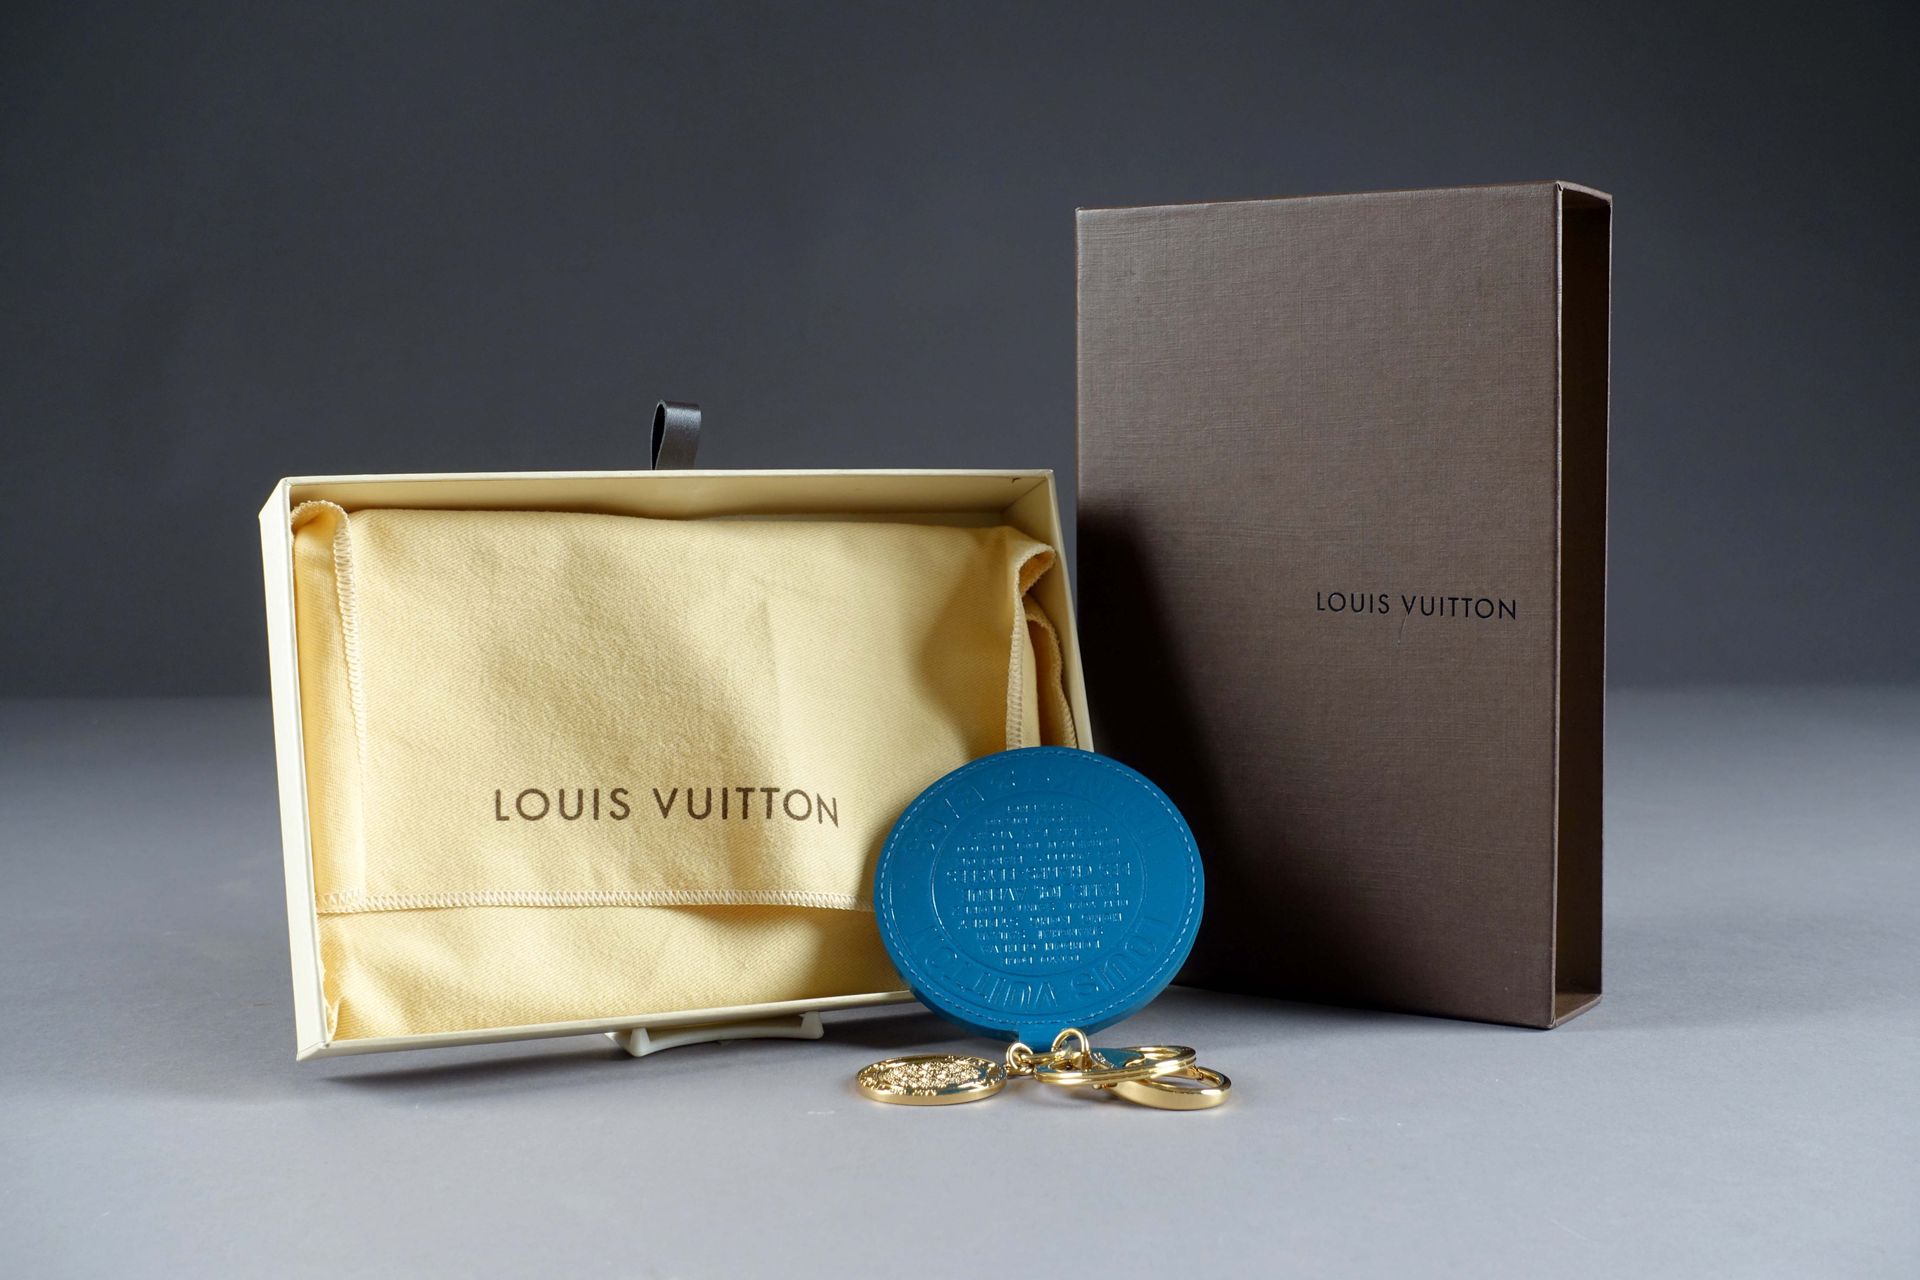 Louis VUITTON. Bag jewel "Key ring". Turquoise blue patent leather and gold meta&hellip;